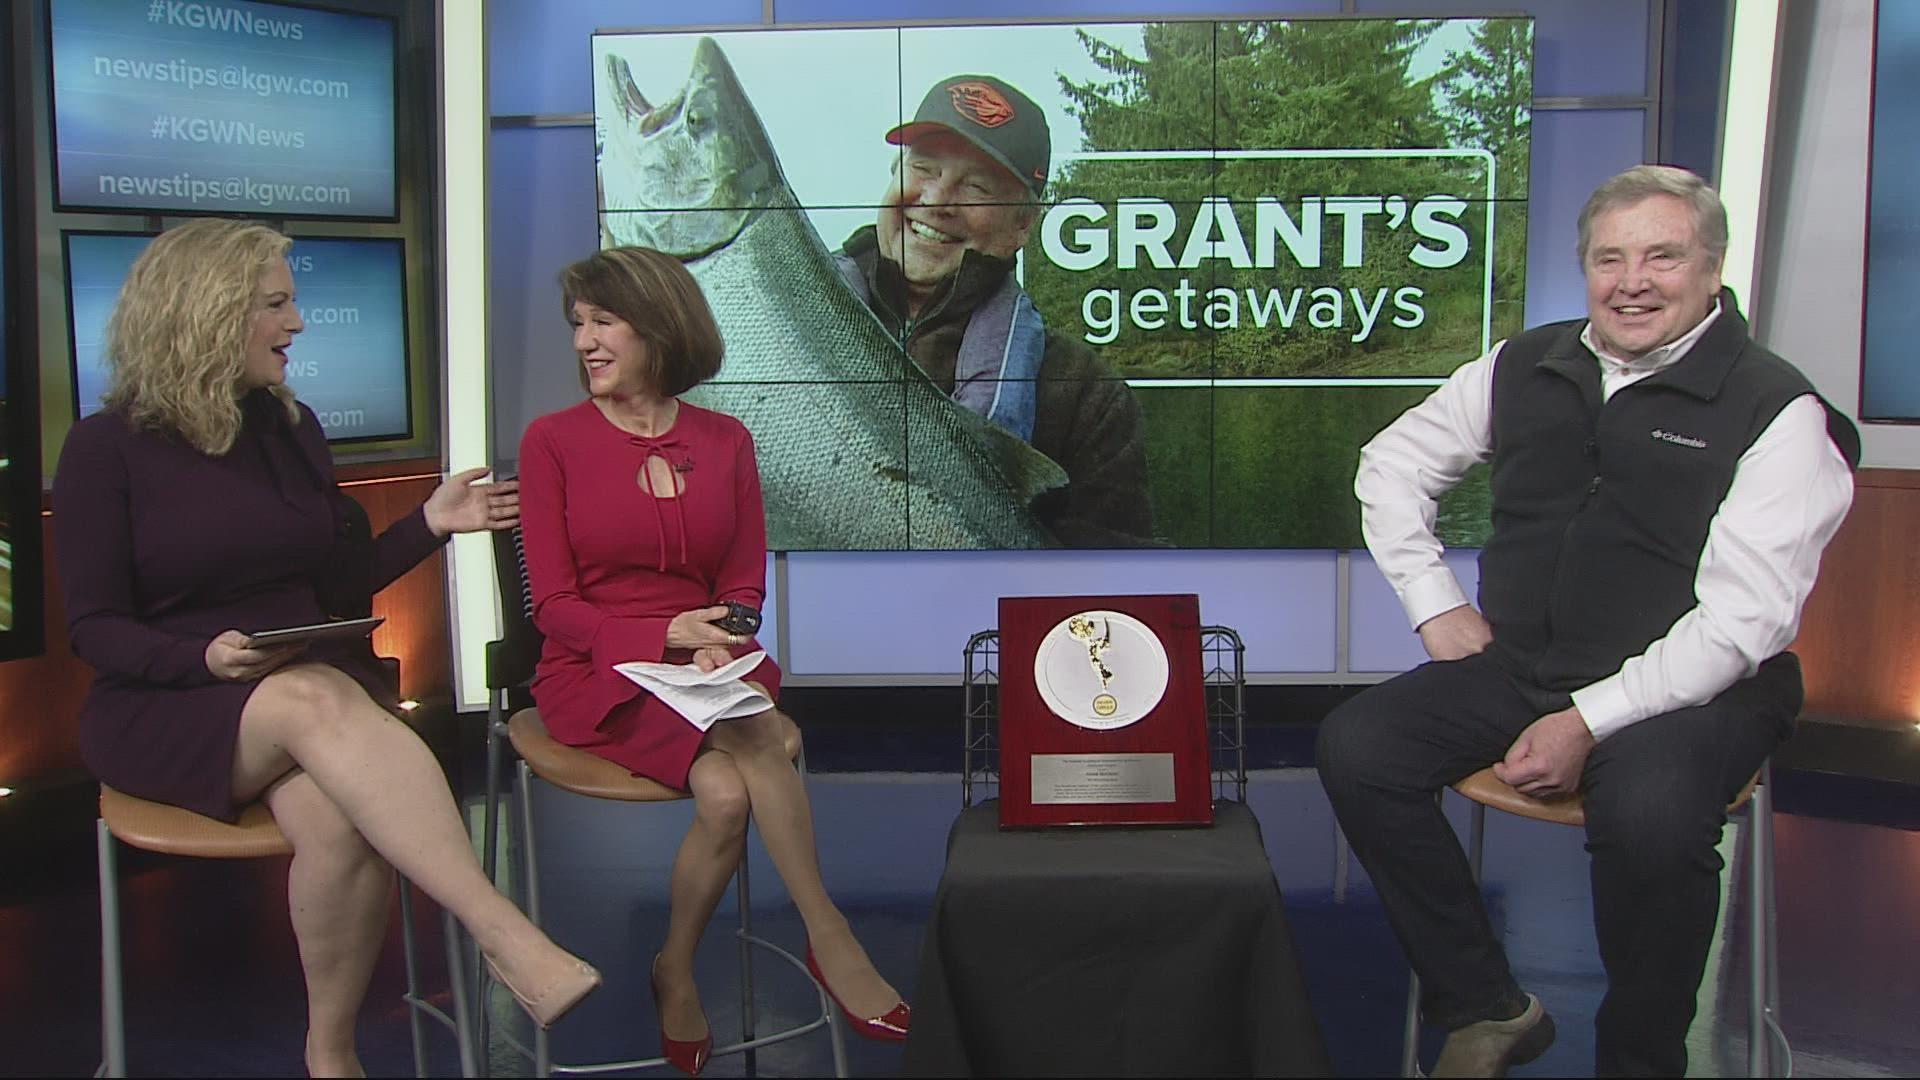 Inductees are honored for 25 years or more in the TV industry. Grant began his broadcast career at KGW back in 1982.